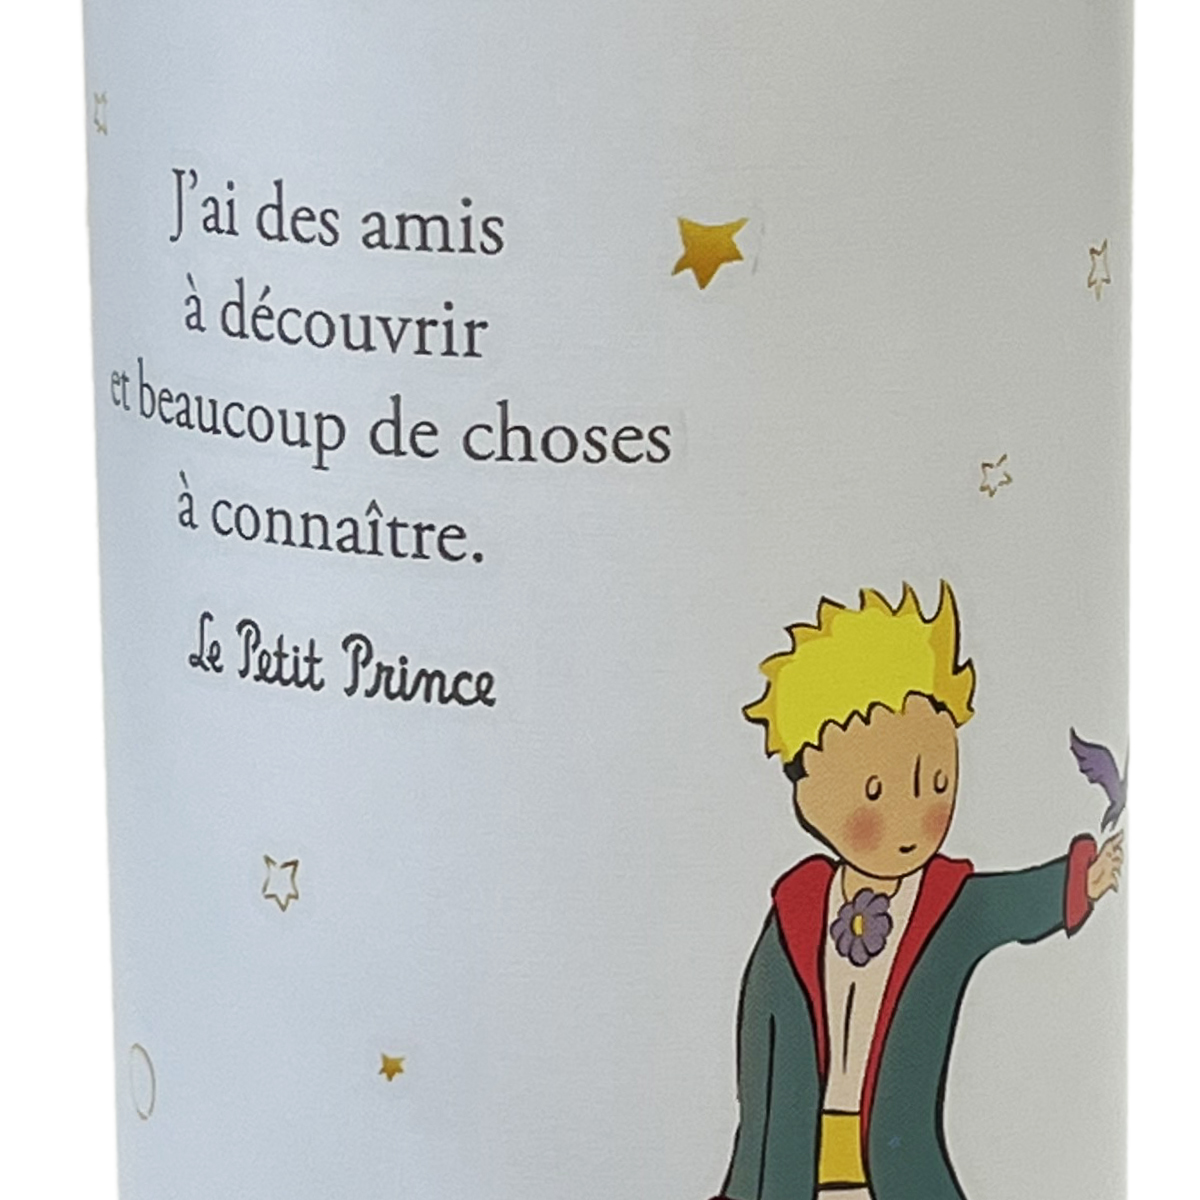 The little Prince isothermic stainless steel bottle